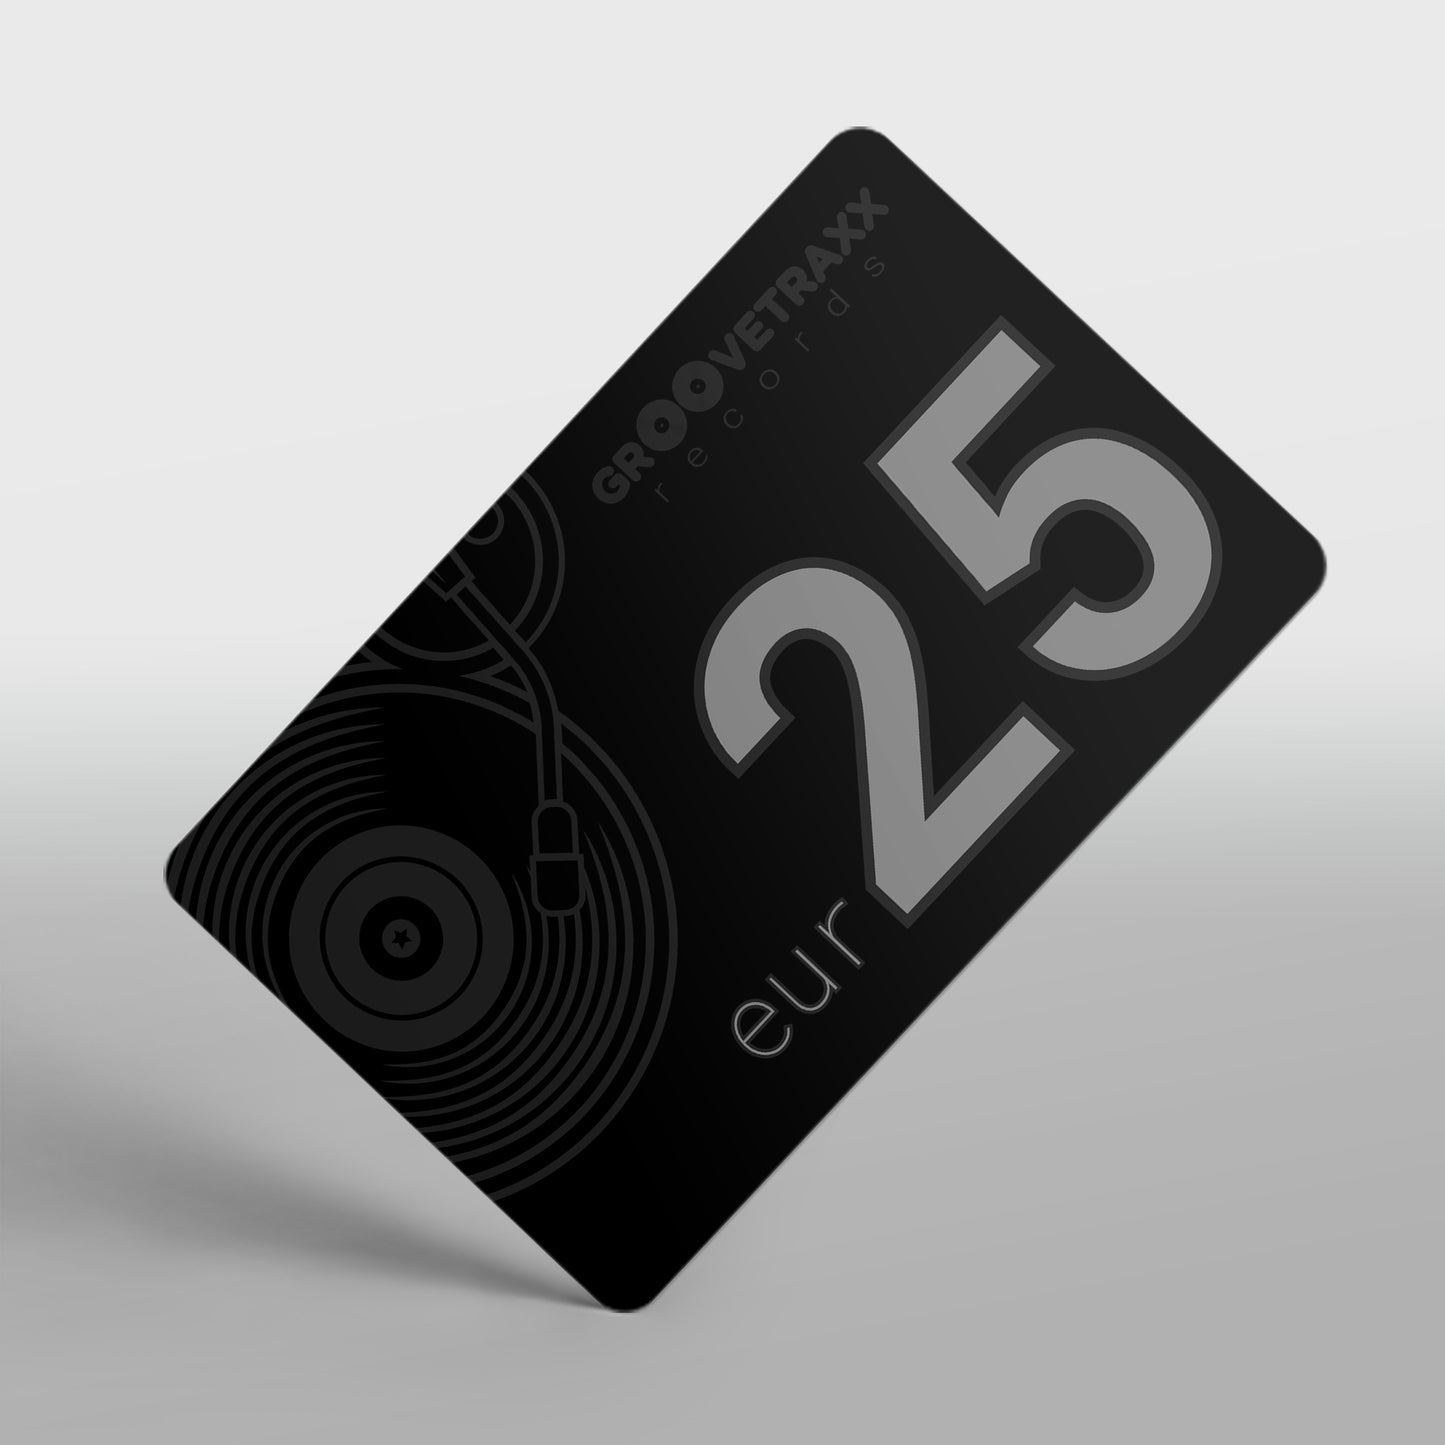 TEST PRODUCT: EUR GIFT CARD